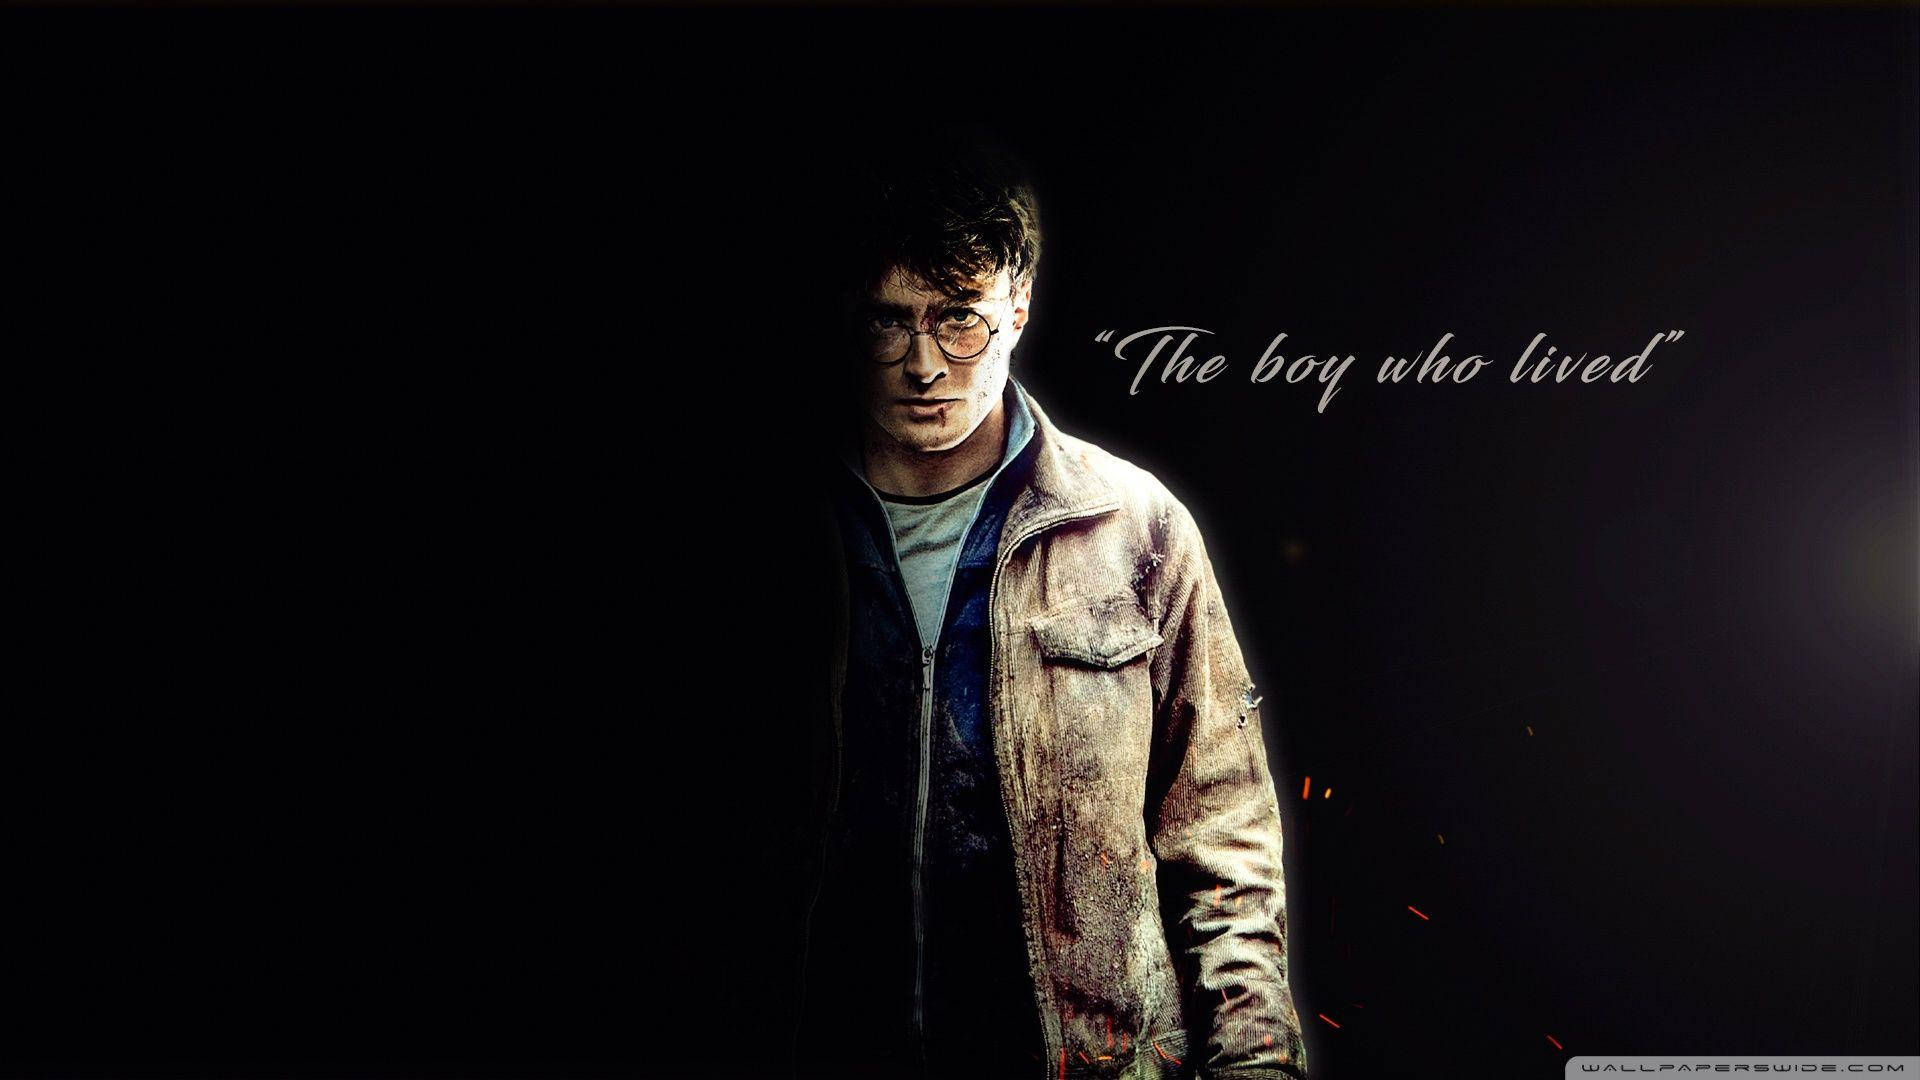 Harry Potter 1920X1080 Wallpaper and Background Image